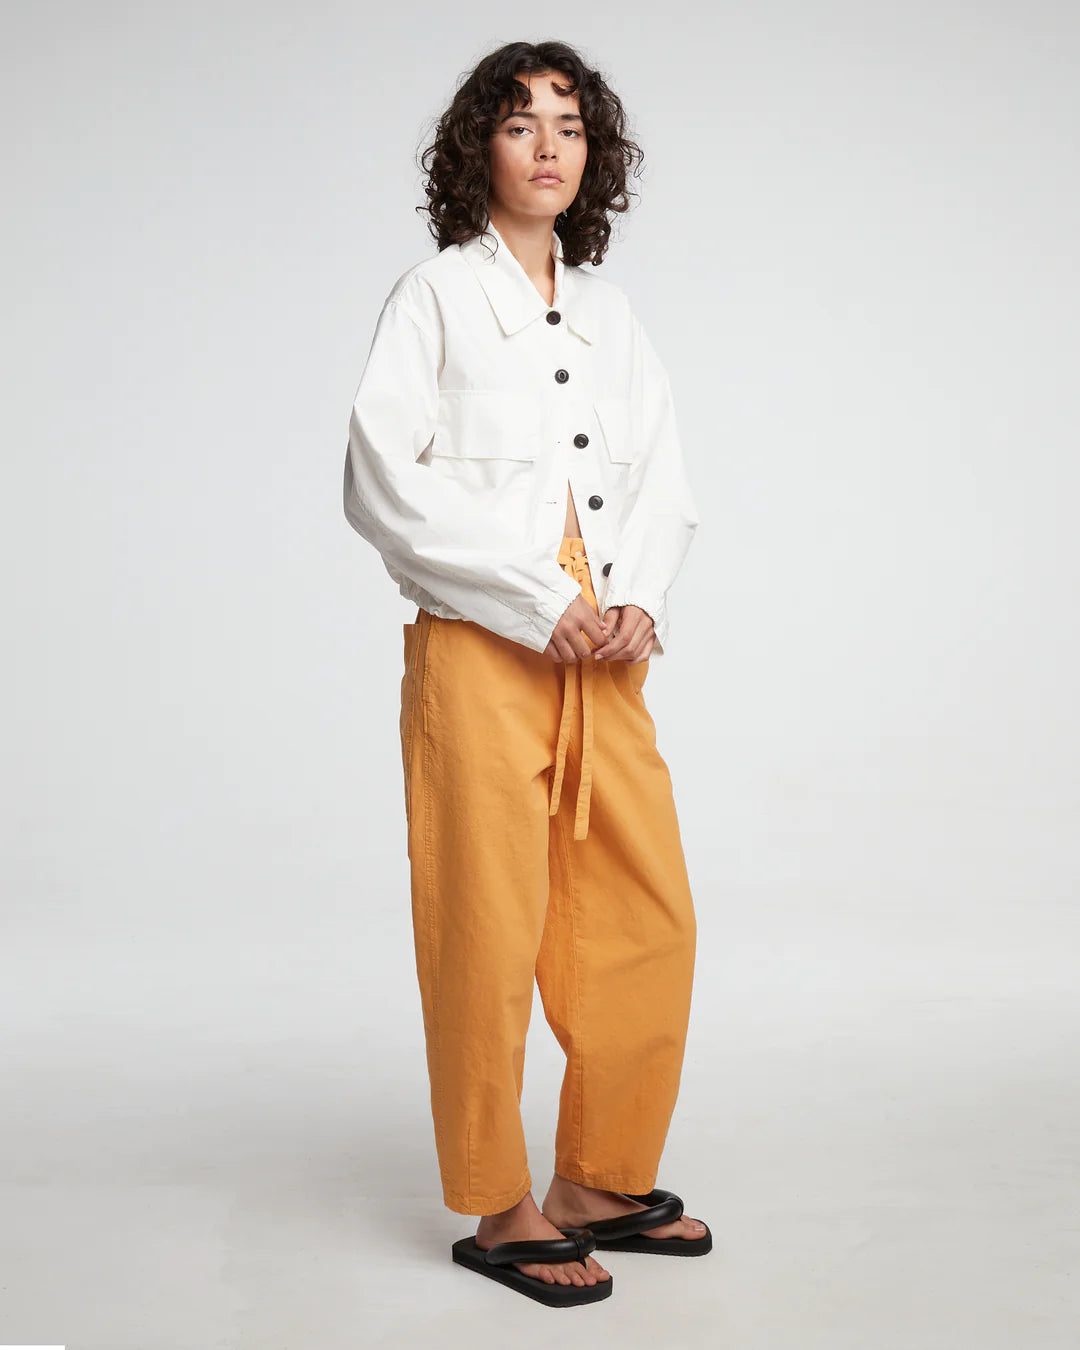 Girls of Dust Pasha Cotton Linen Pant in chamois